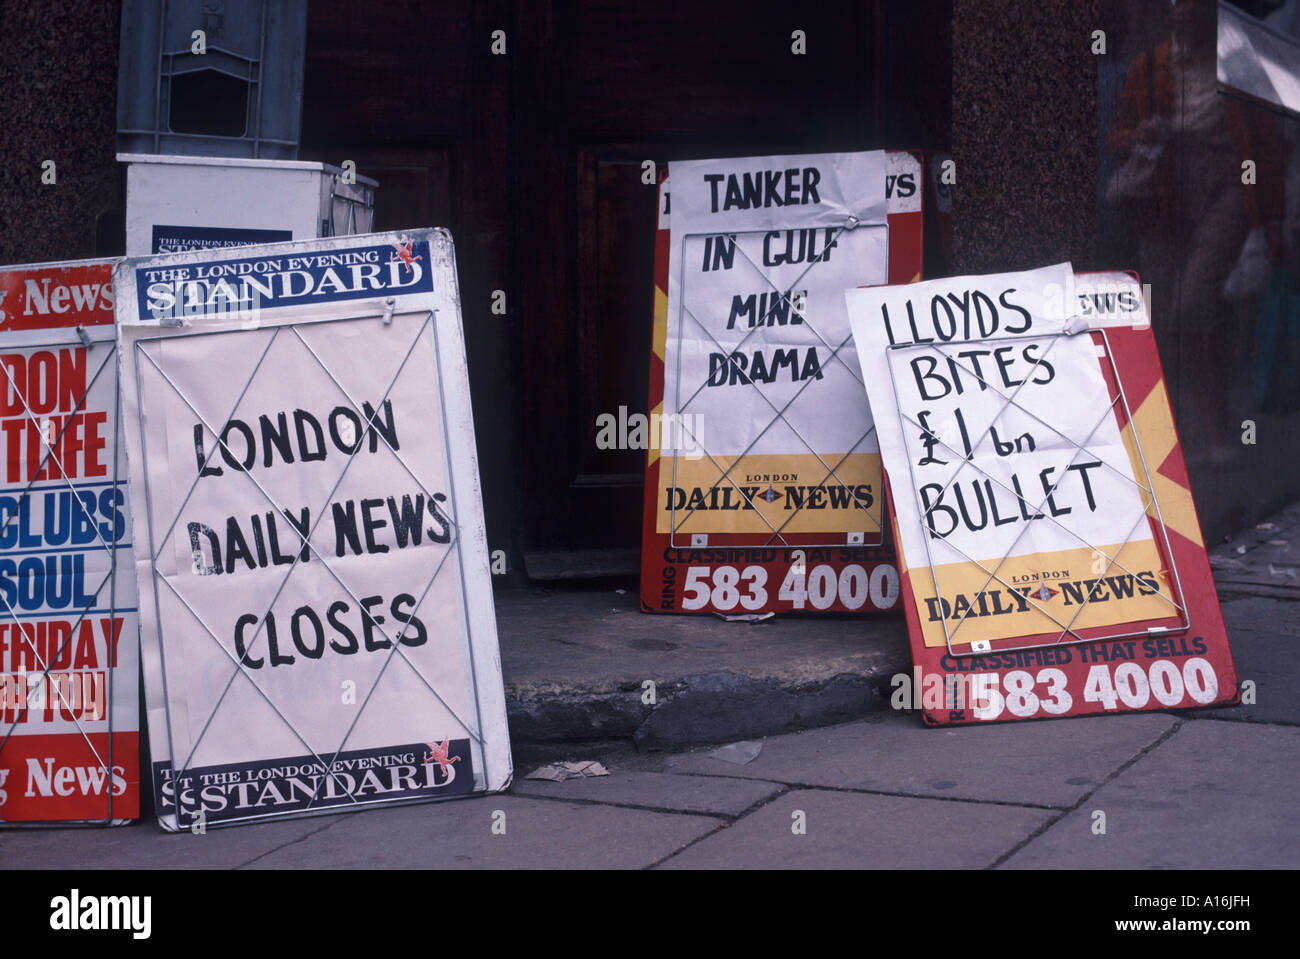 Sandwich board signs declaring closure of newspaper 'London Daily News' in July 1987, London, England Stock Photo